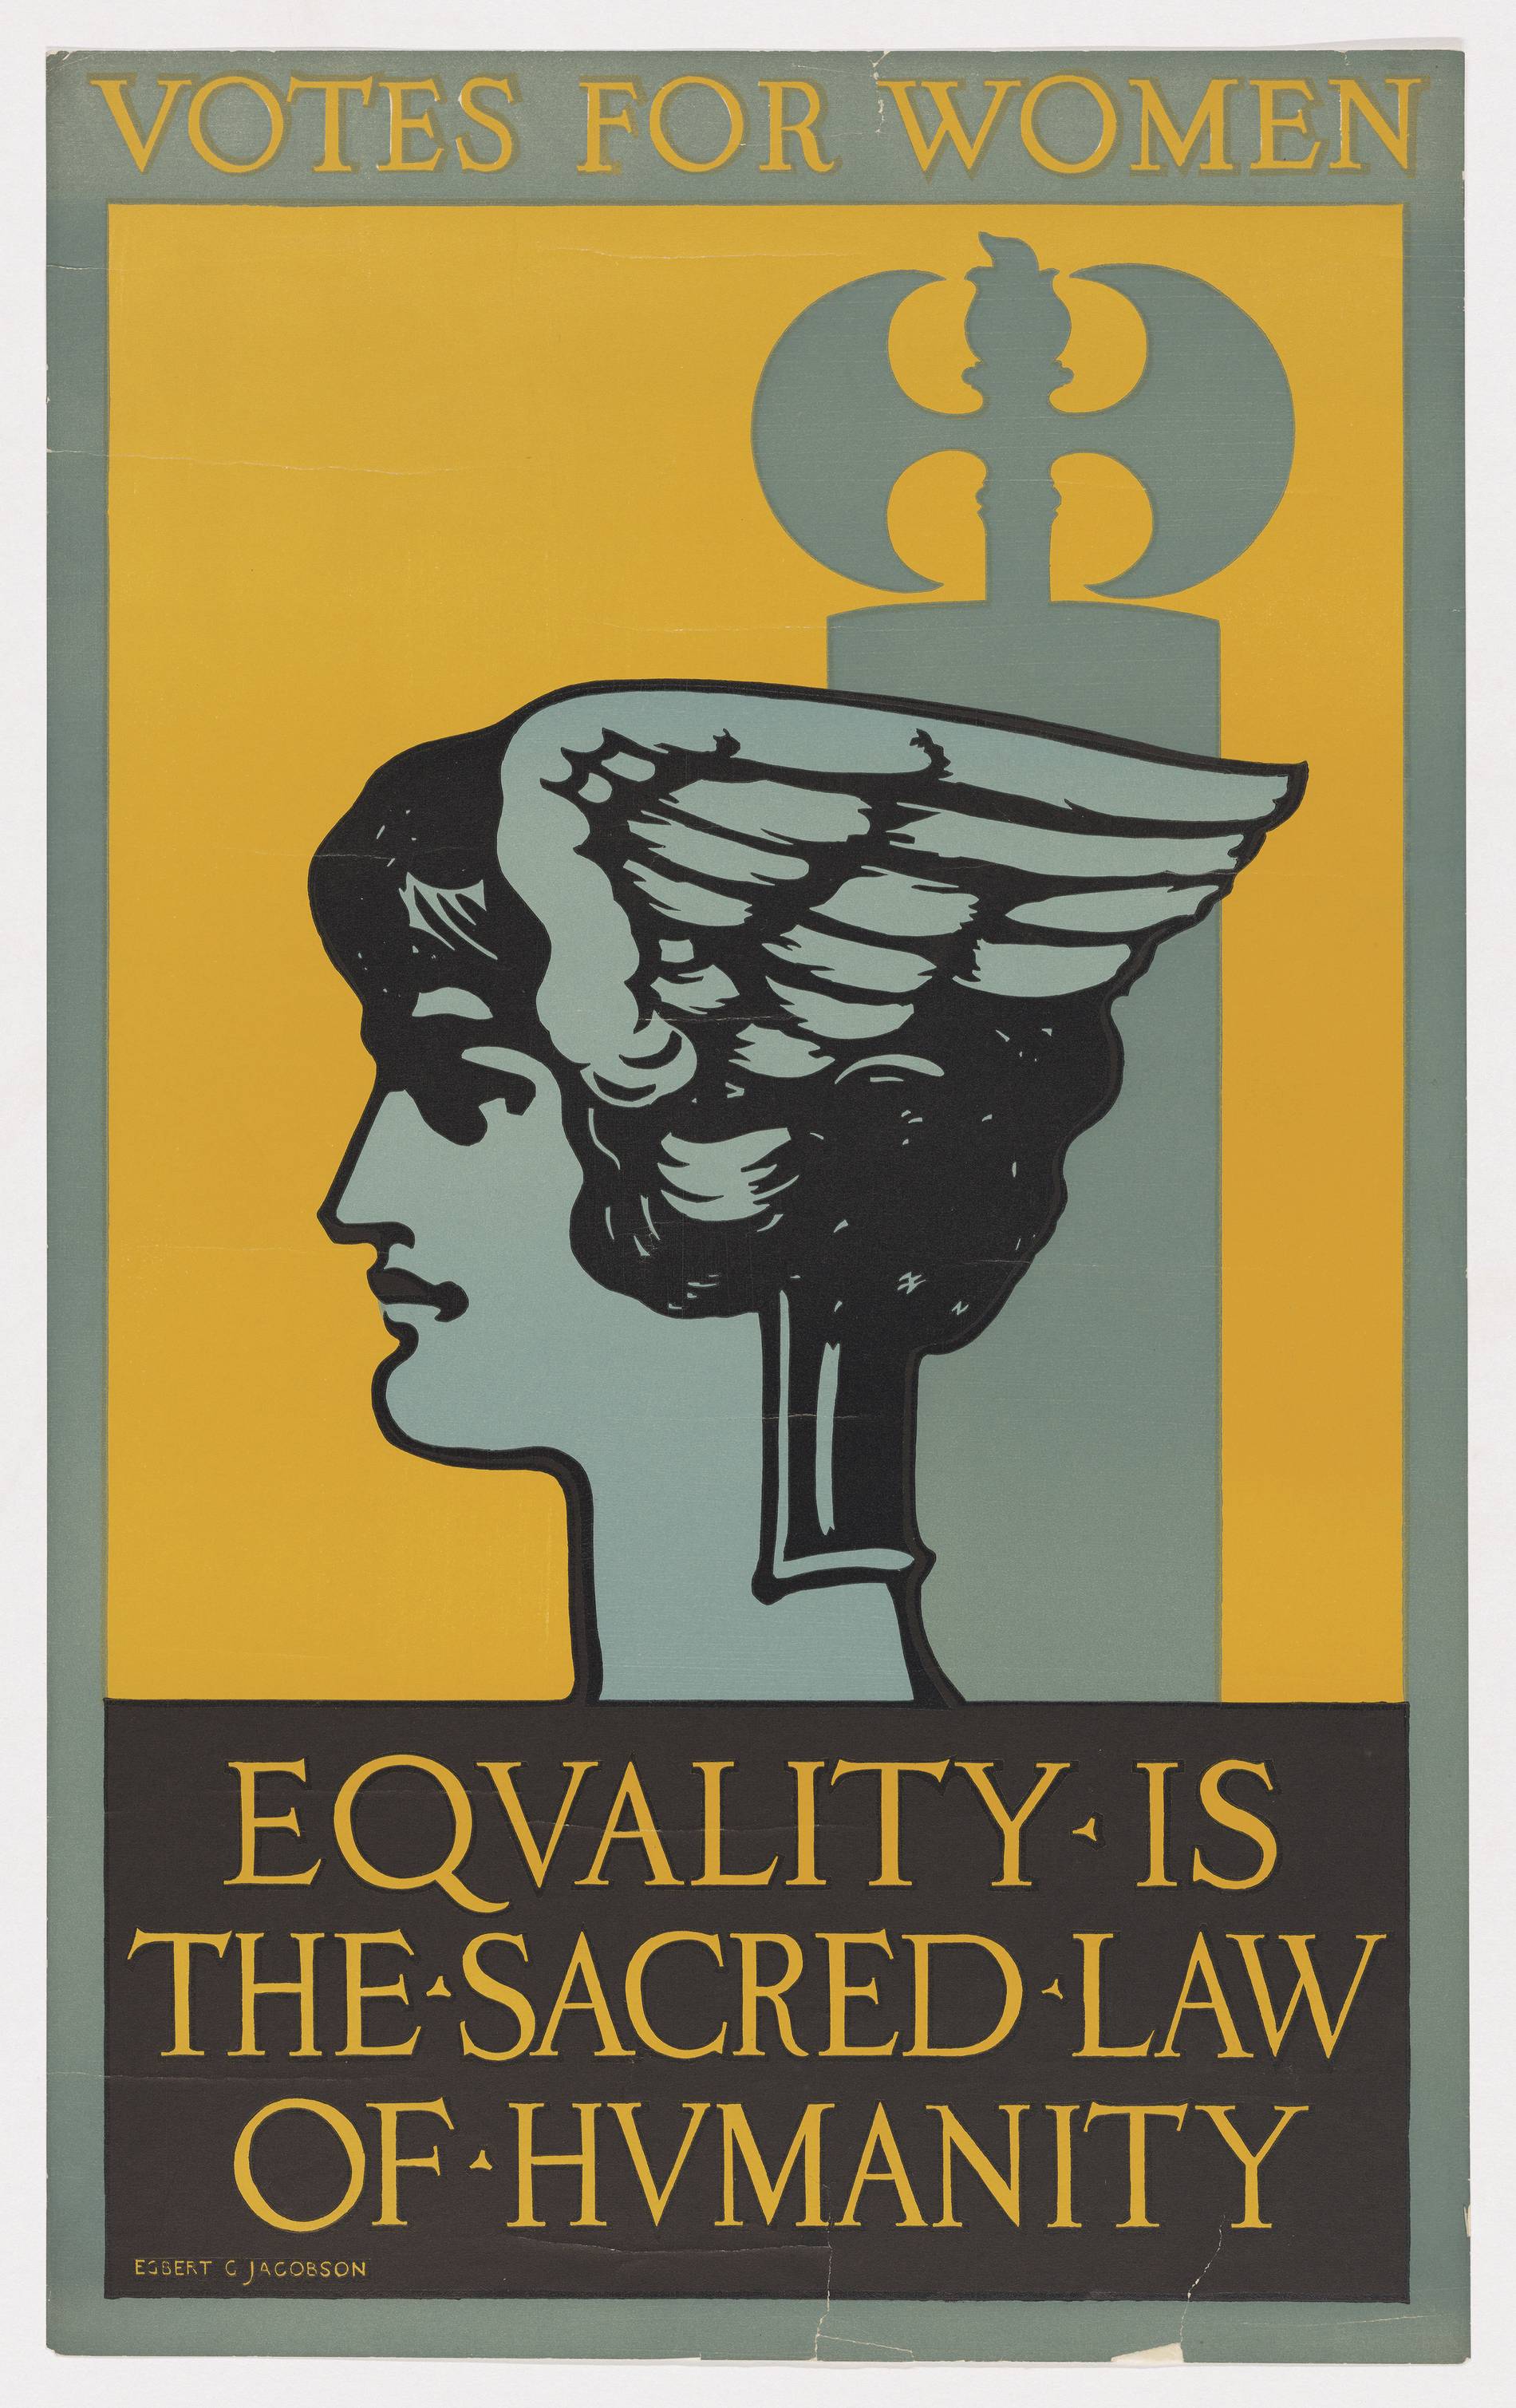 Votes_for_Women_Equality_is_the_Sacred_Law_of_Humanity_Copy.jpg